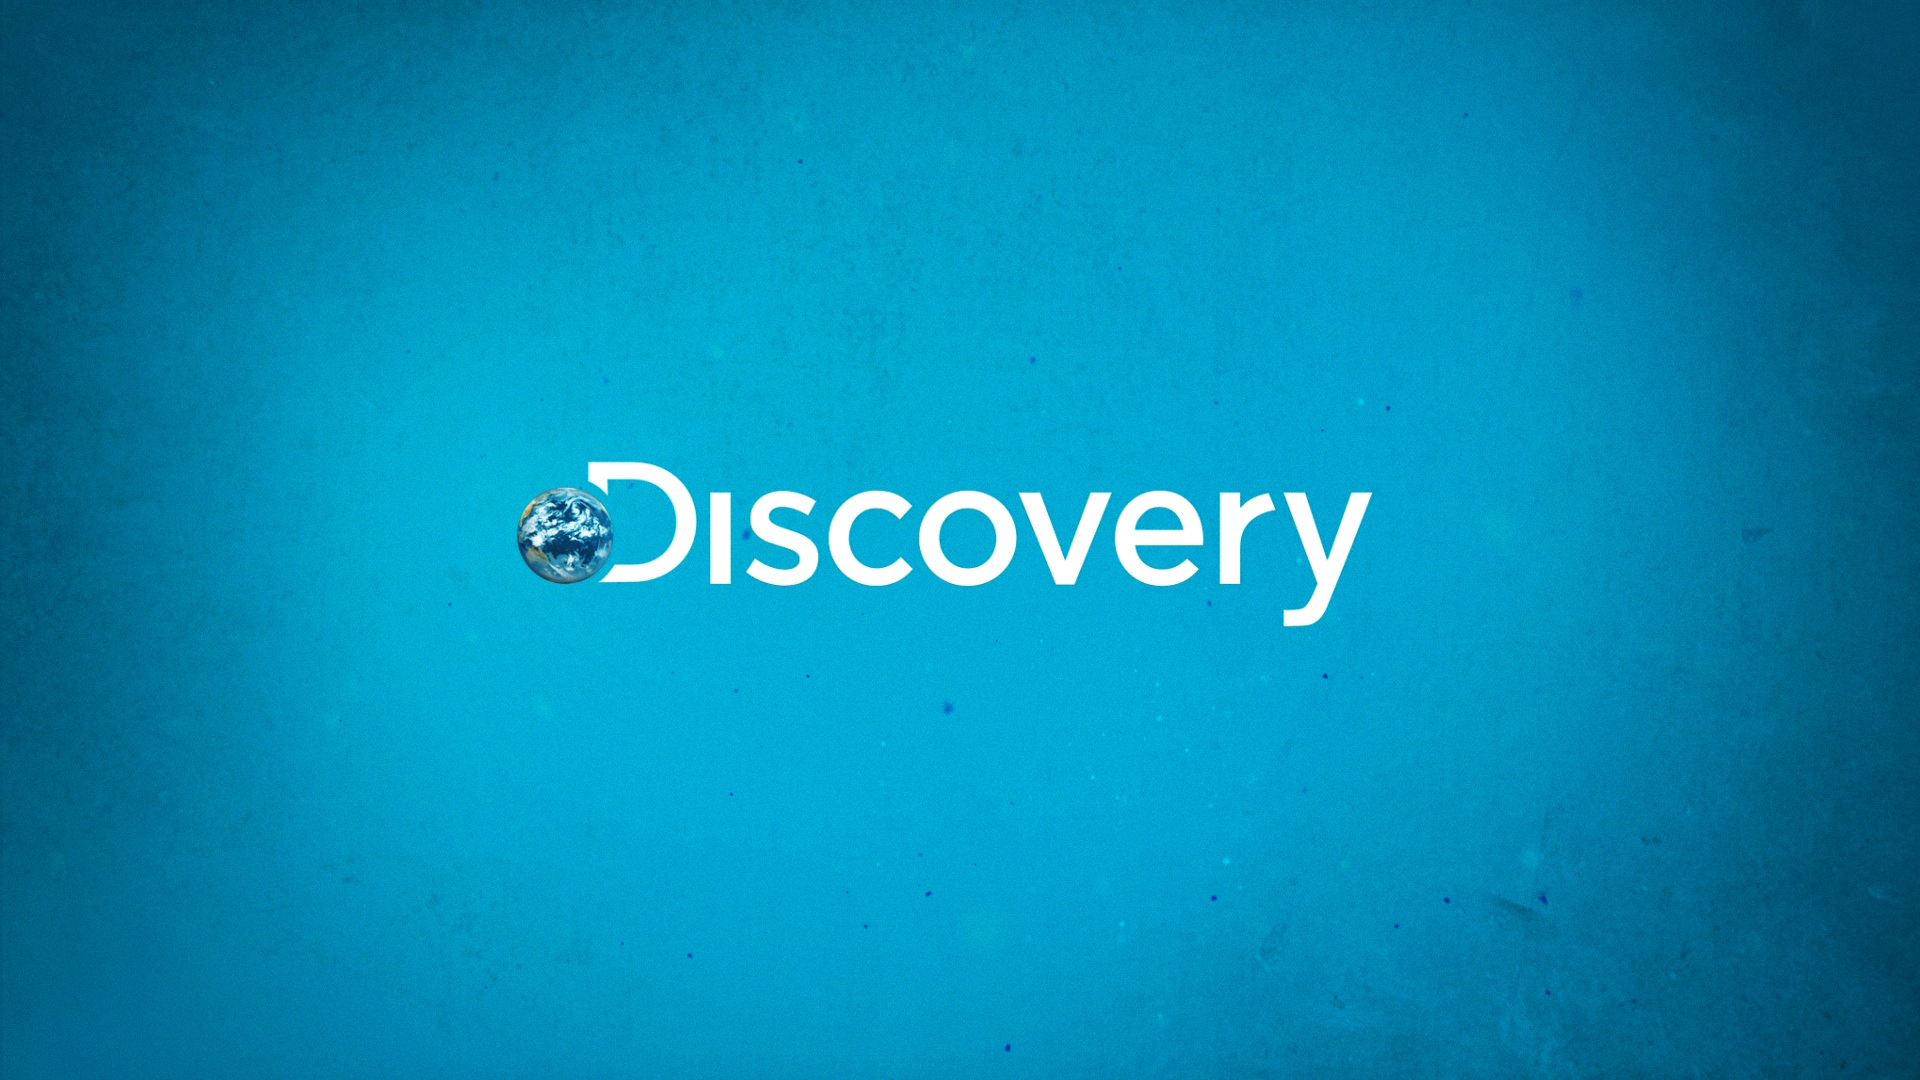 Discovery Channel Wallpaper